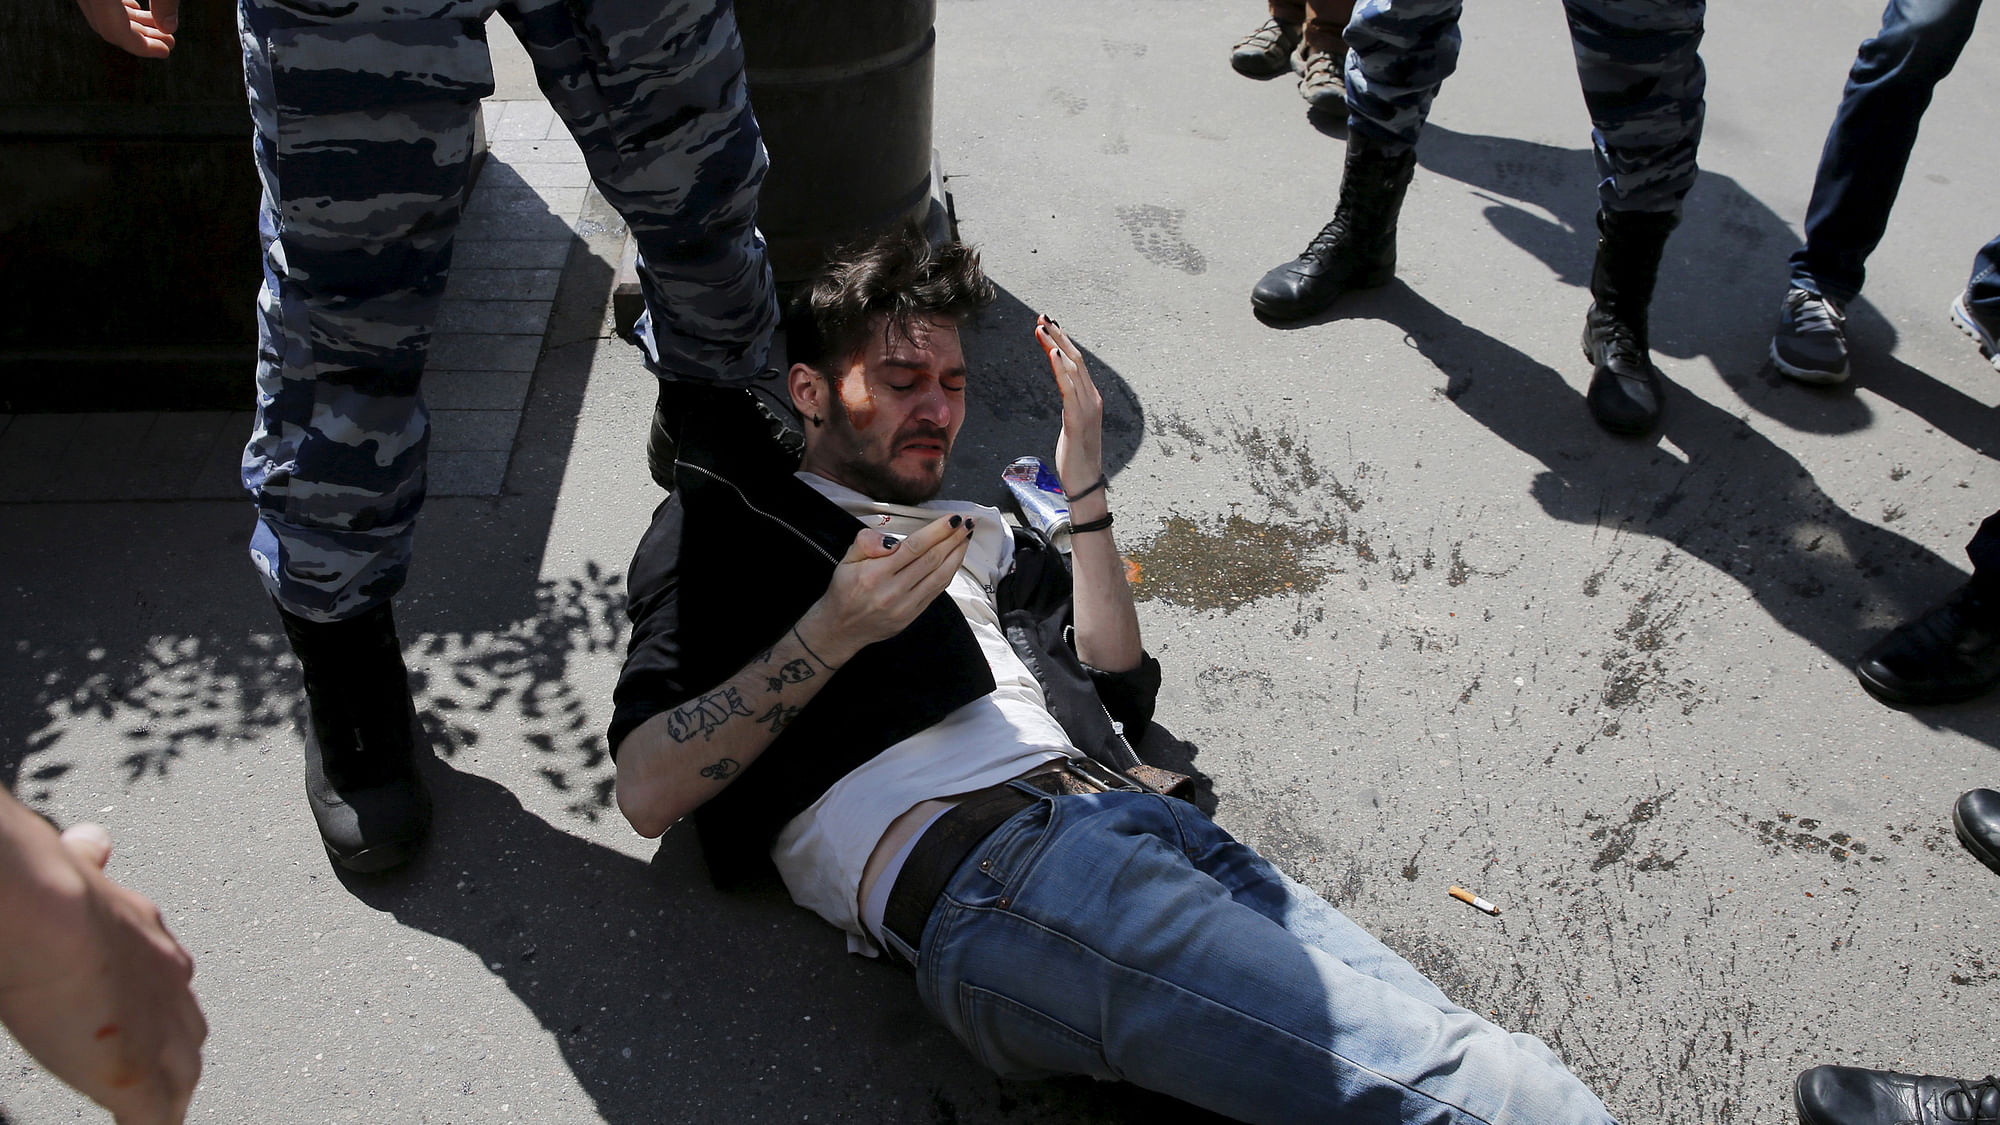 















 A gay rights activist lies on ground after being attacked by
anti-gay protesters during an LGBT (lesbian, gay, bisexual, and transgender)
community rally in Russia (Photo: Reuters) 